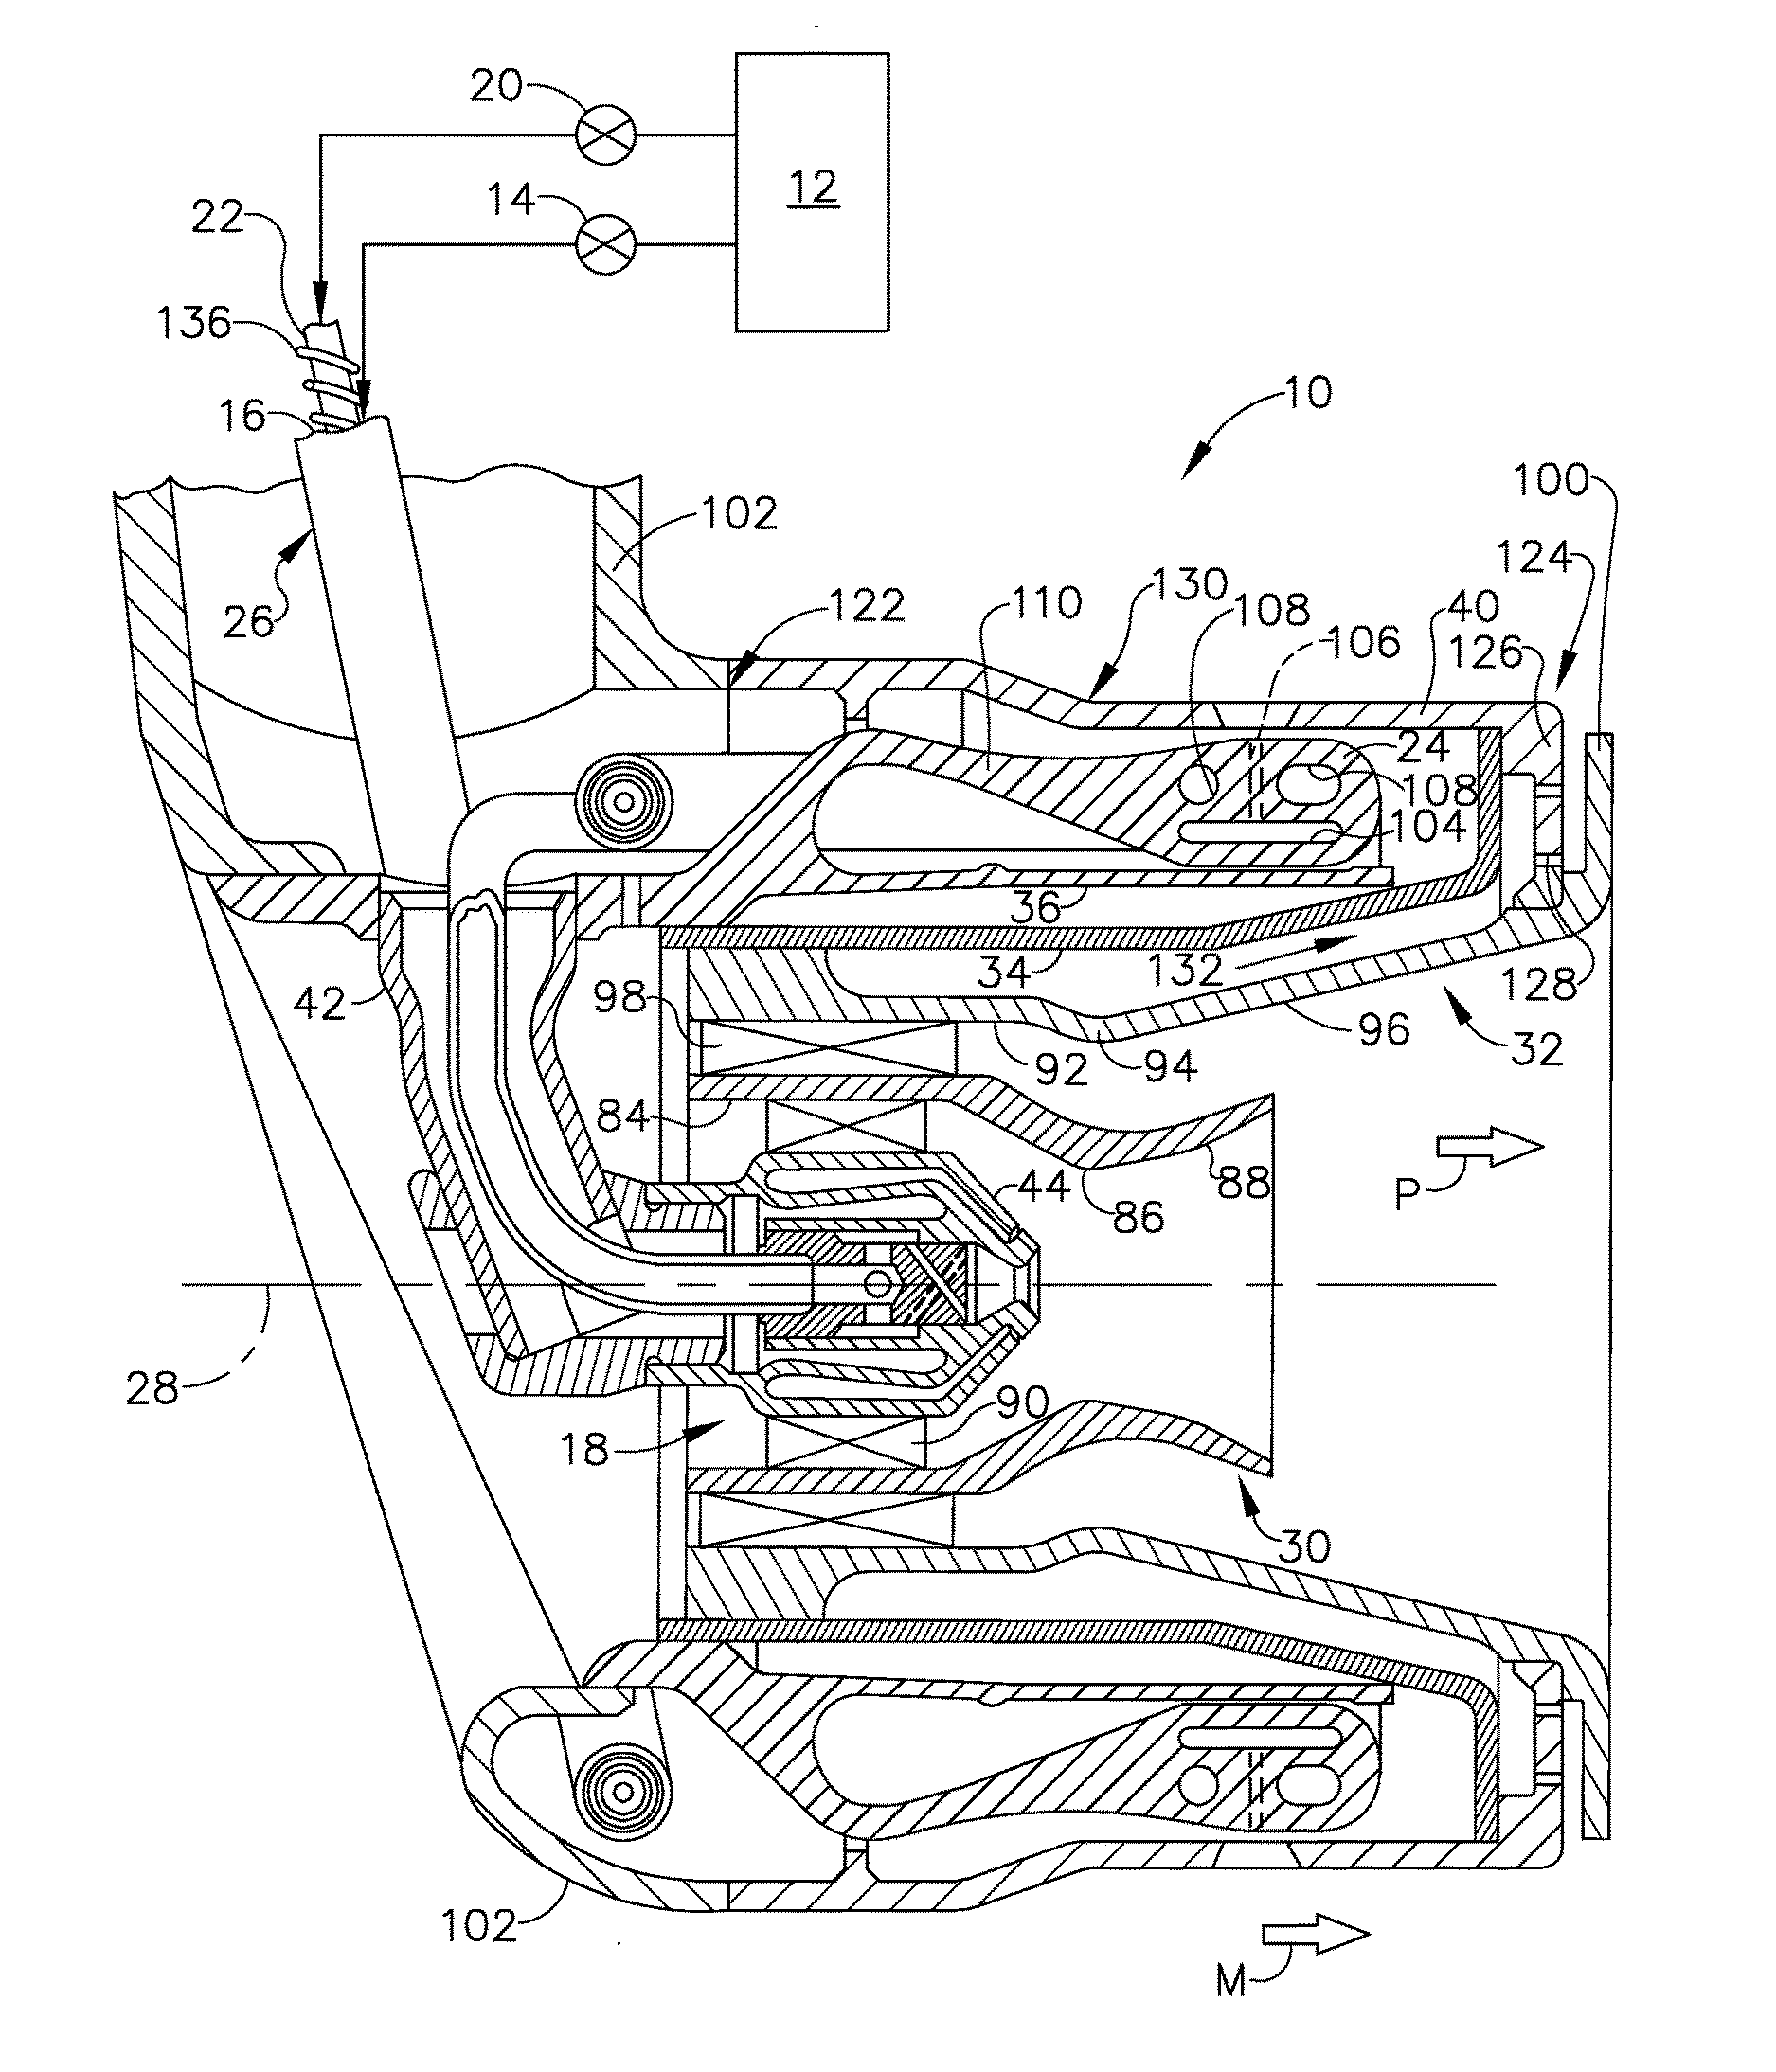 Fuel nozzle with flexible support structures